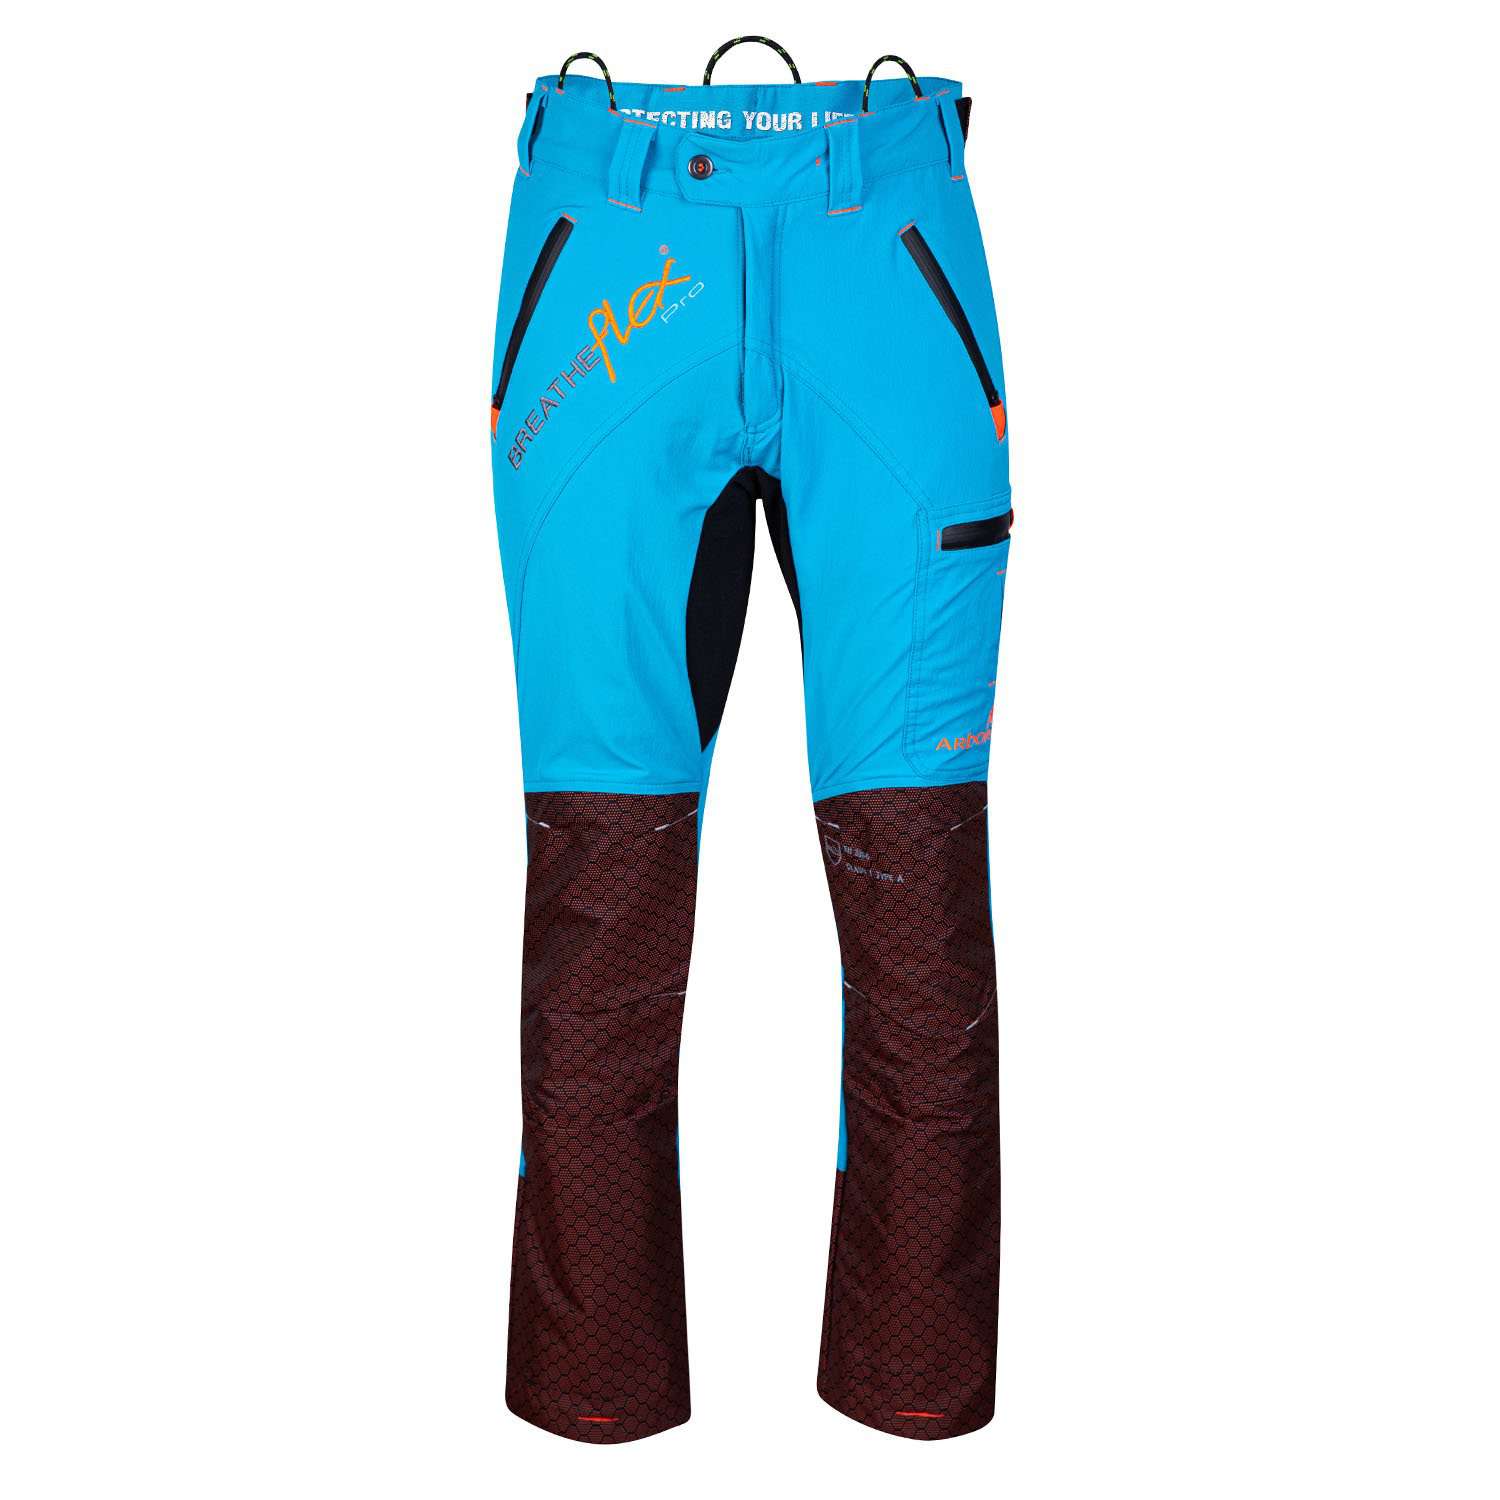 AT4071 Freestyle Chainsaw Trousers Design C Class 1 - Aqua